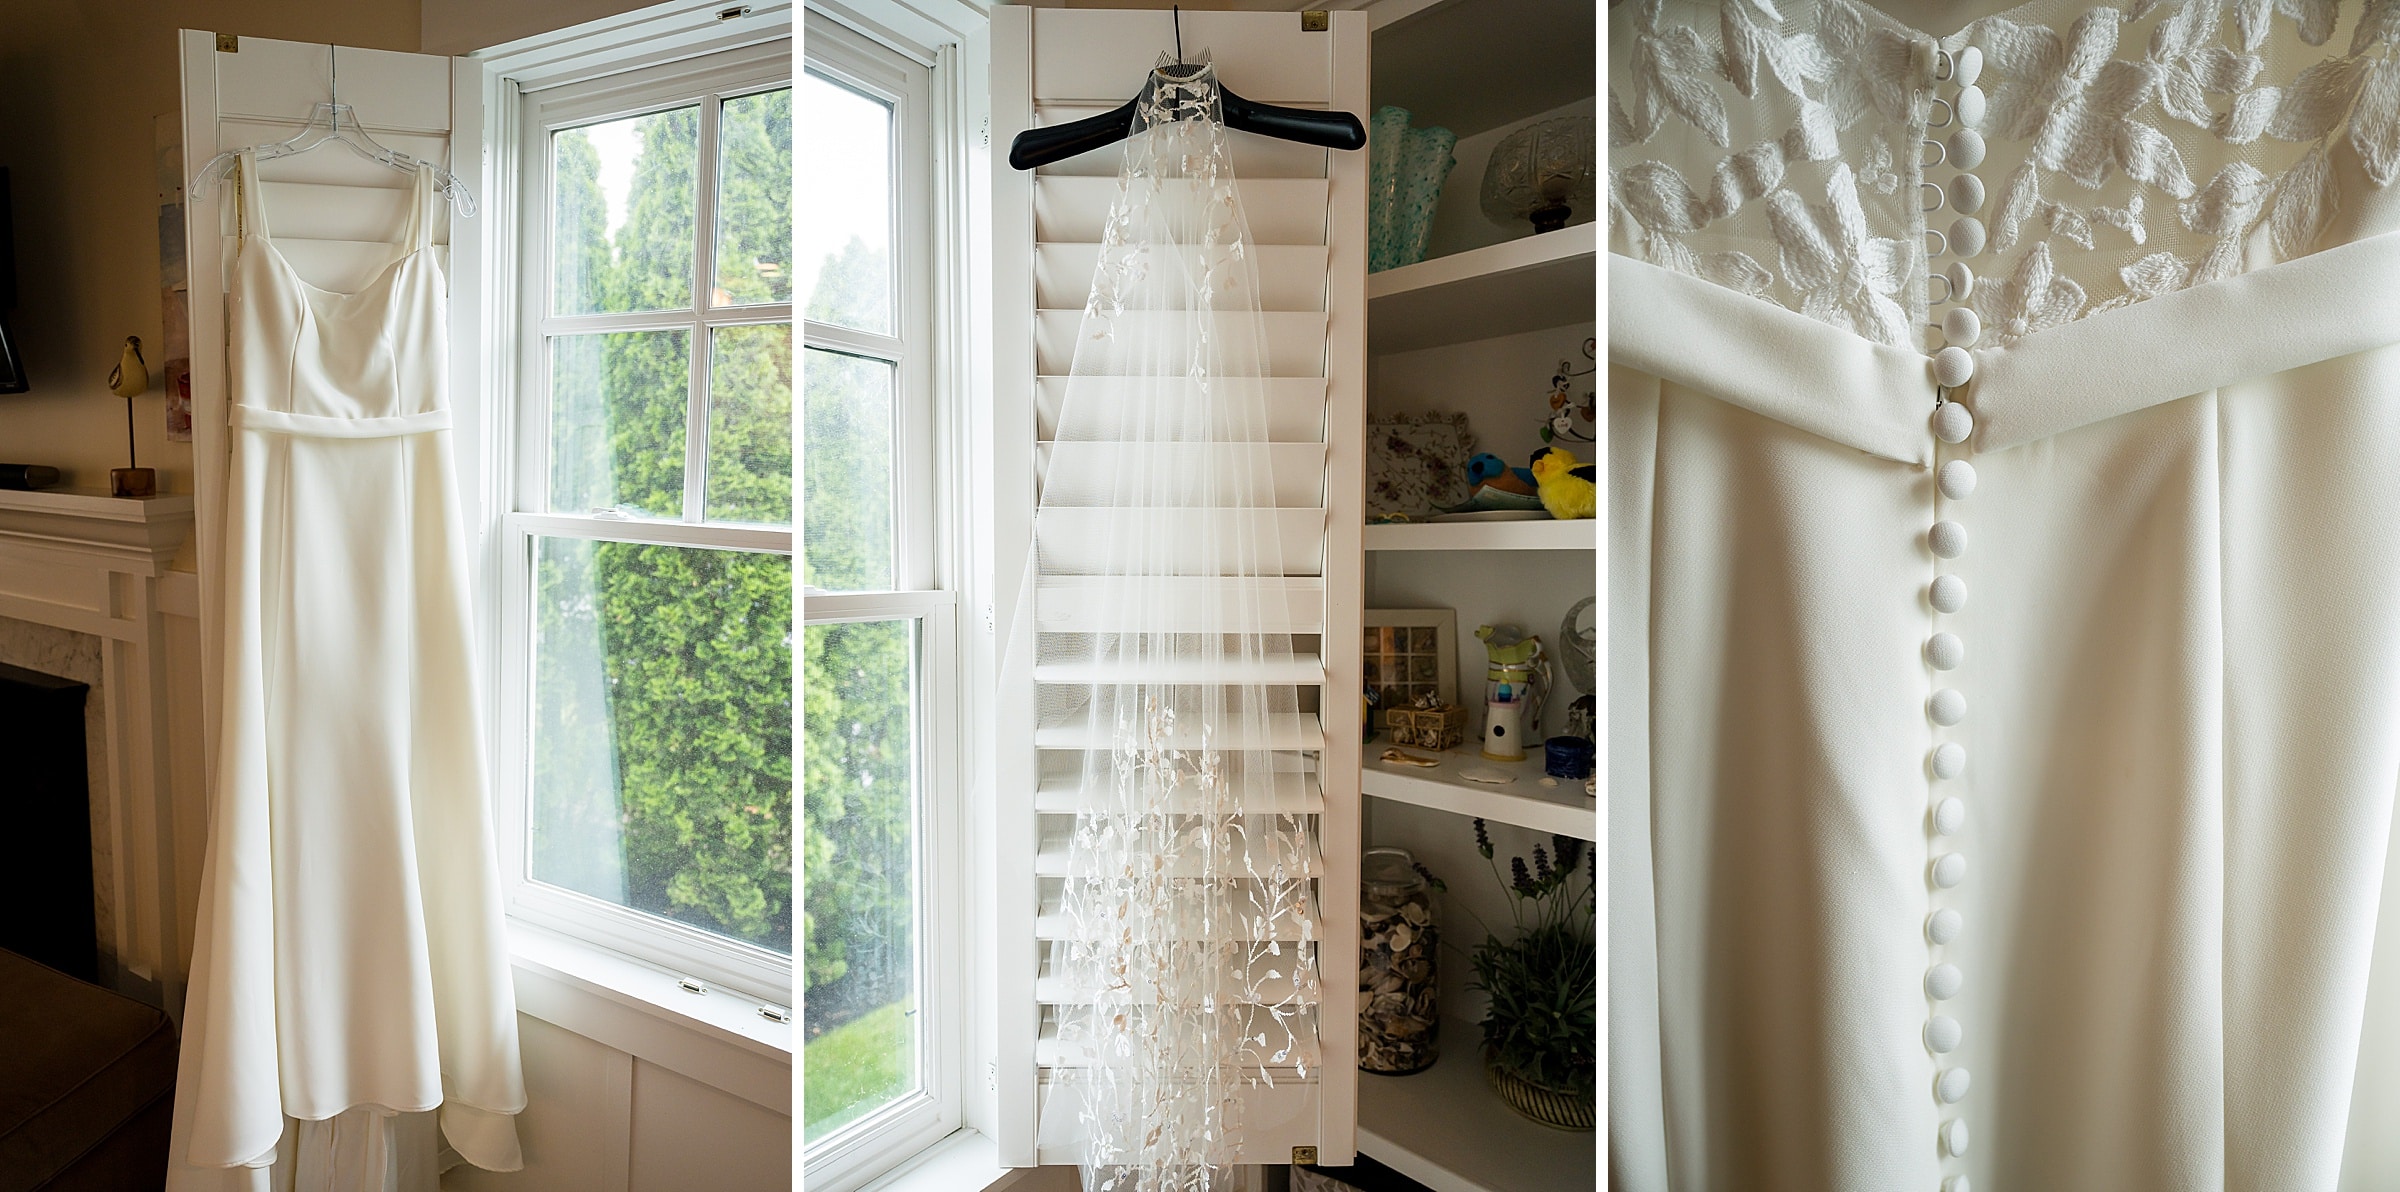 A white wedding dress on a hanger with close-up images of its lace details and buttoned back.